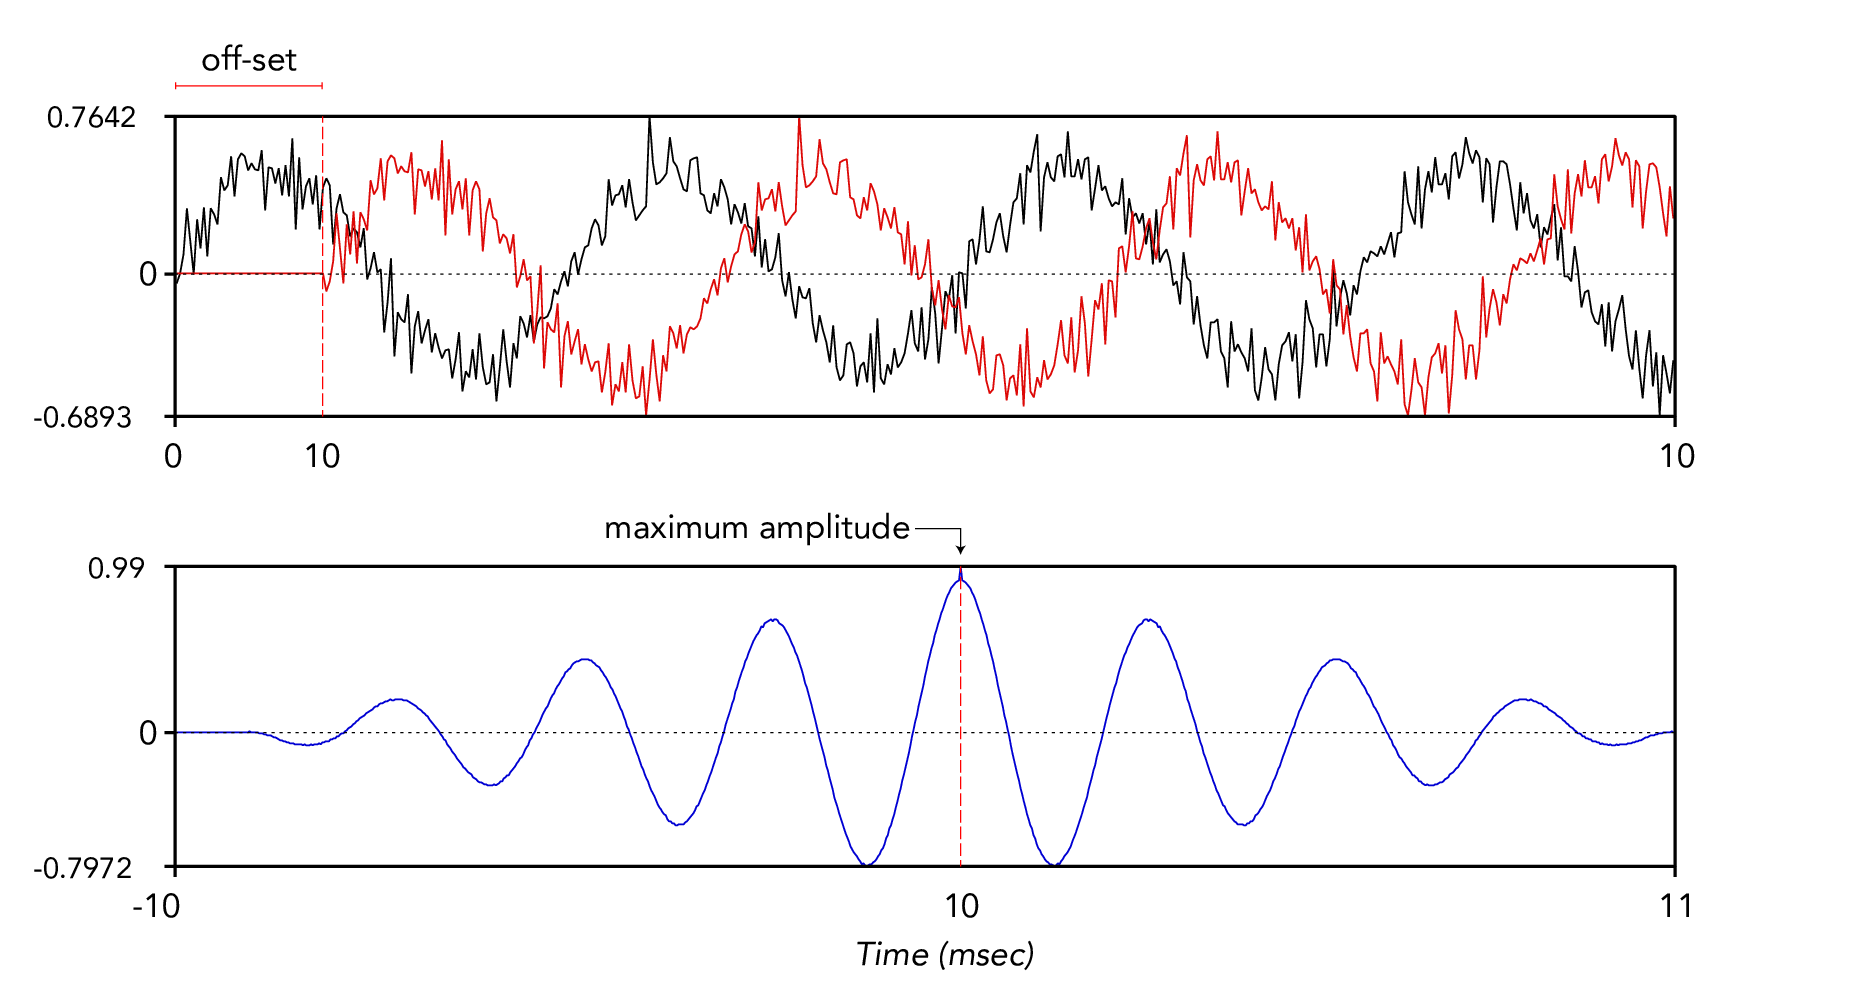 Synchronisation of two sounds by cross-correlation. The top panel shows the waveforms of two identical sounds, one of which has been offset by 10 ms. The bottom panel shows the cross-correlation of the two sounds in the top panel. The offset of the sounds corresponds to the time of maximum amplitude in the cross-correlated sound.